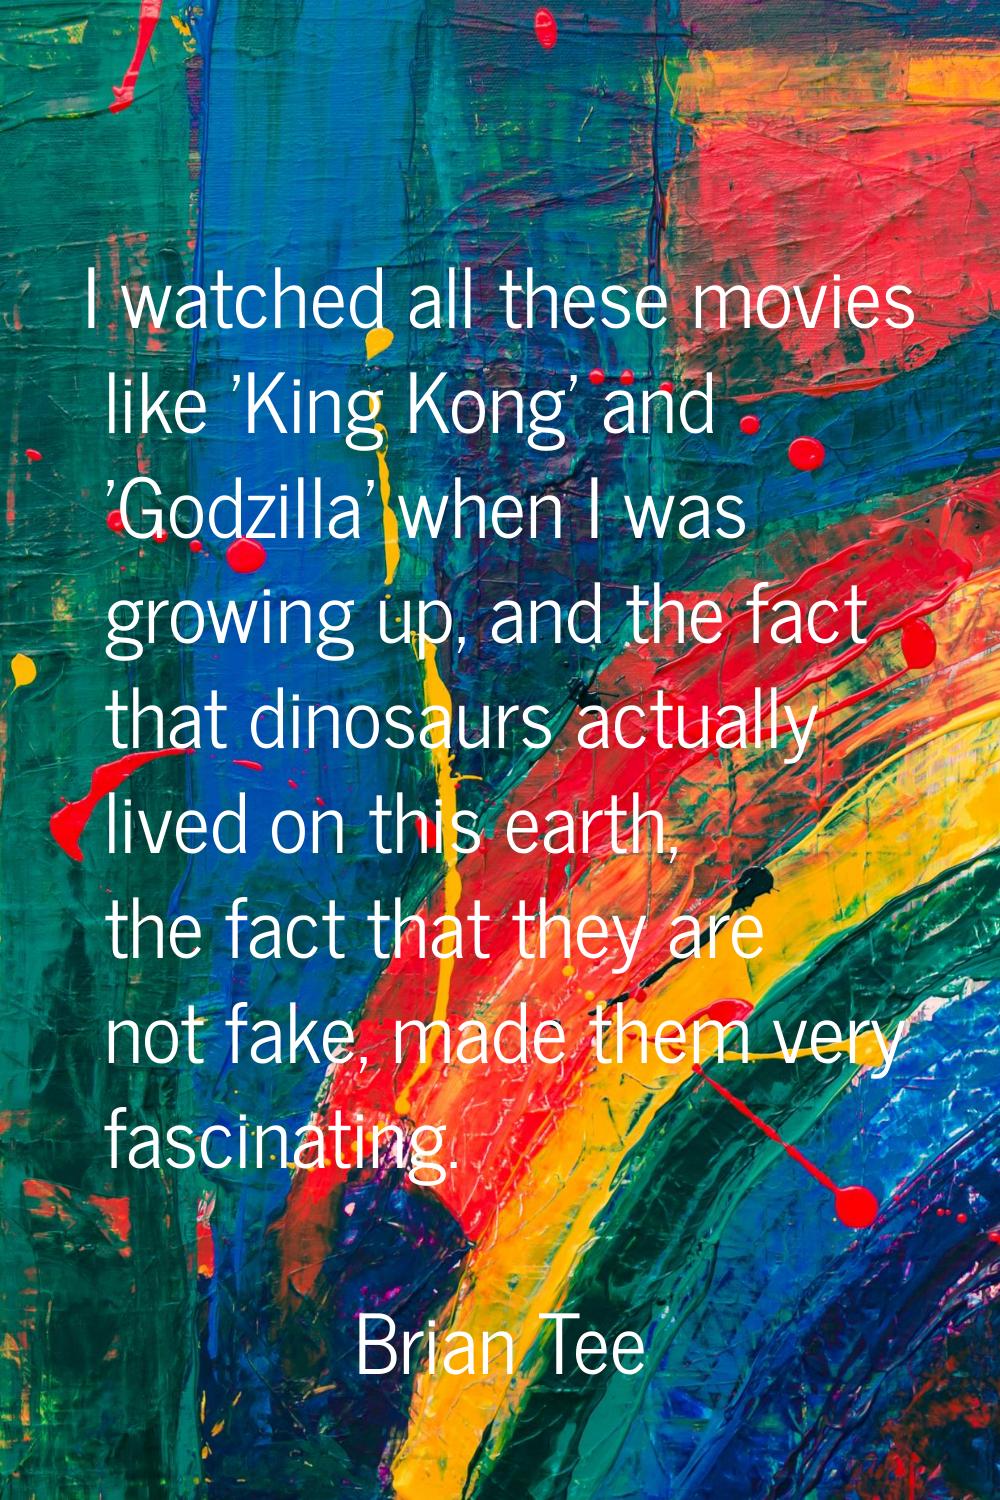 I watched all these movies like 'King Kong' and 'Godzilla' when I was growing up, and the fact that